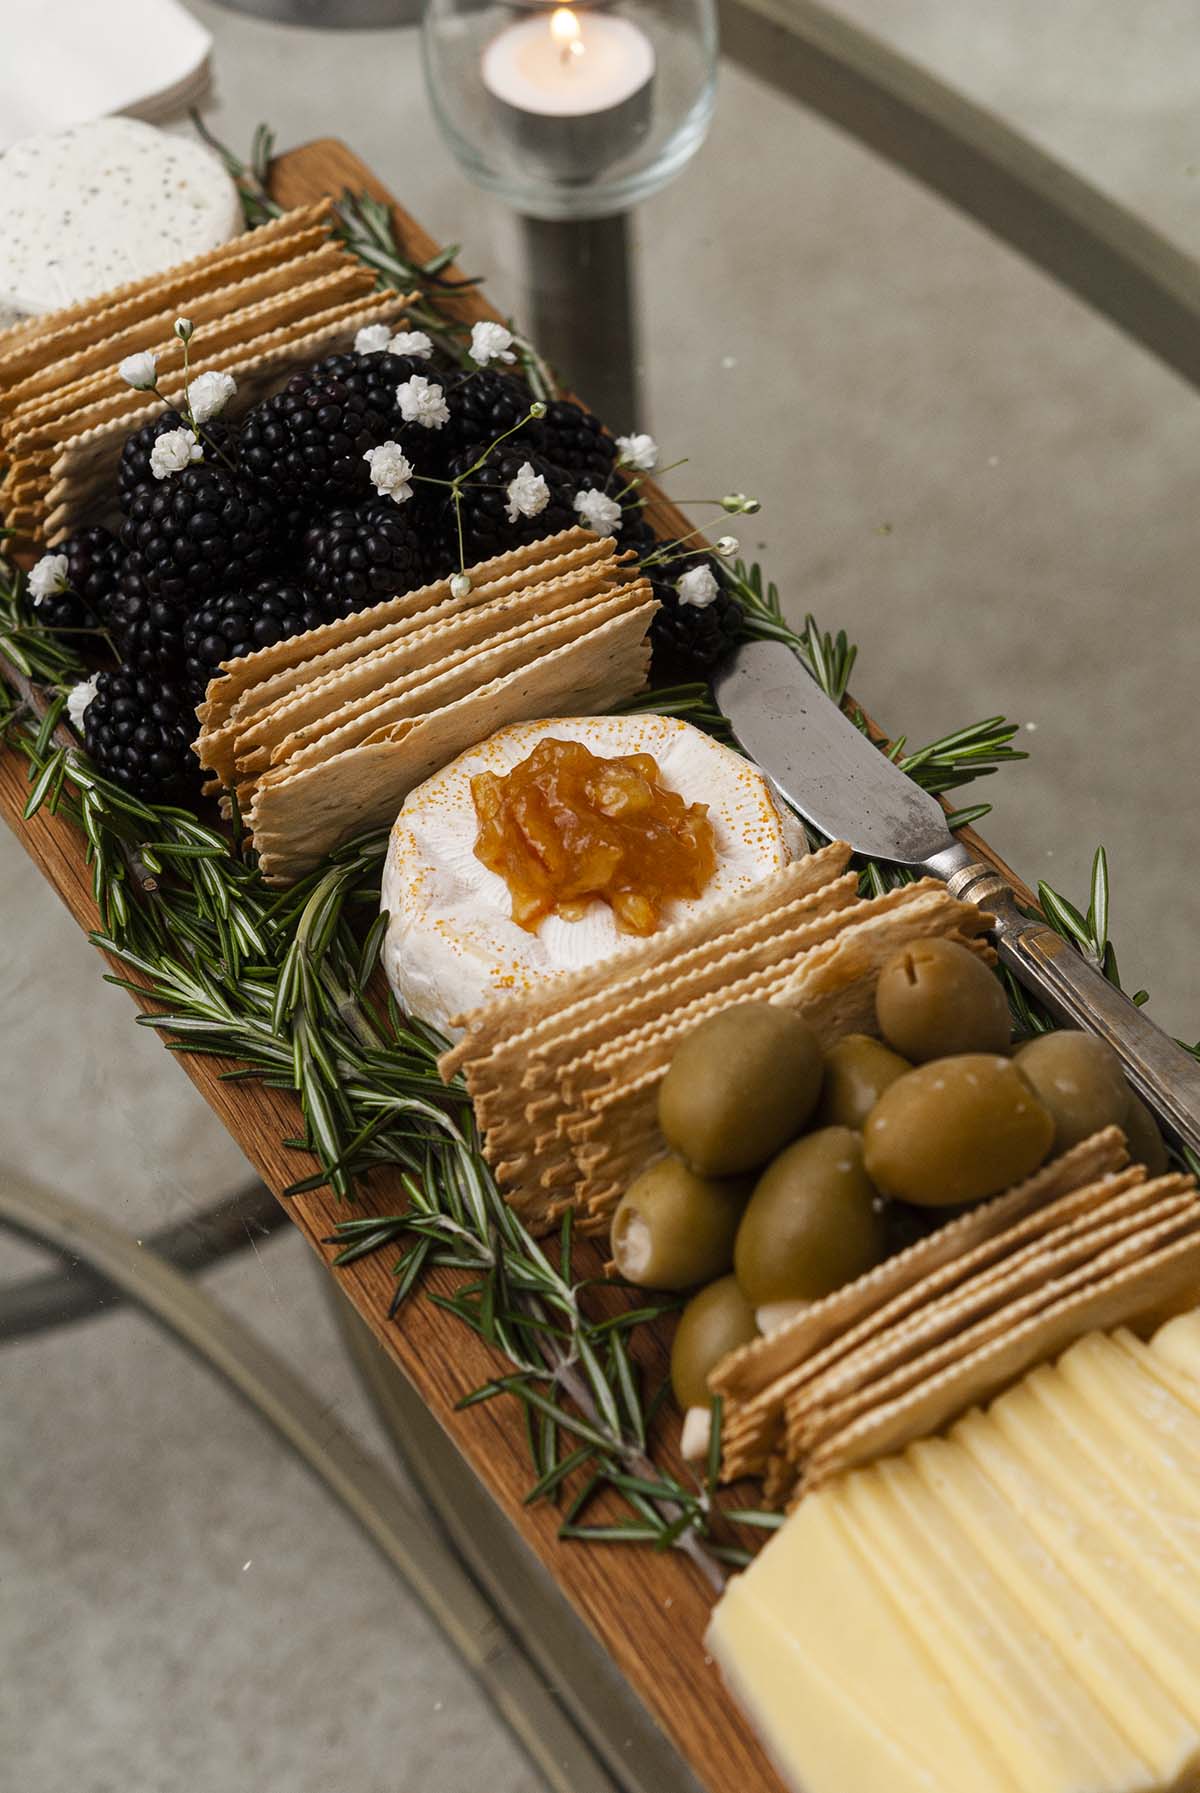 A cheese board with cheese, olives, berries, crackers and rosemary.